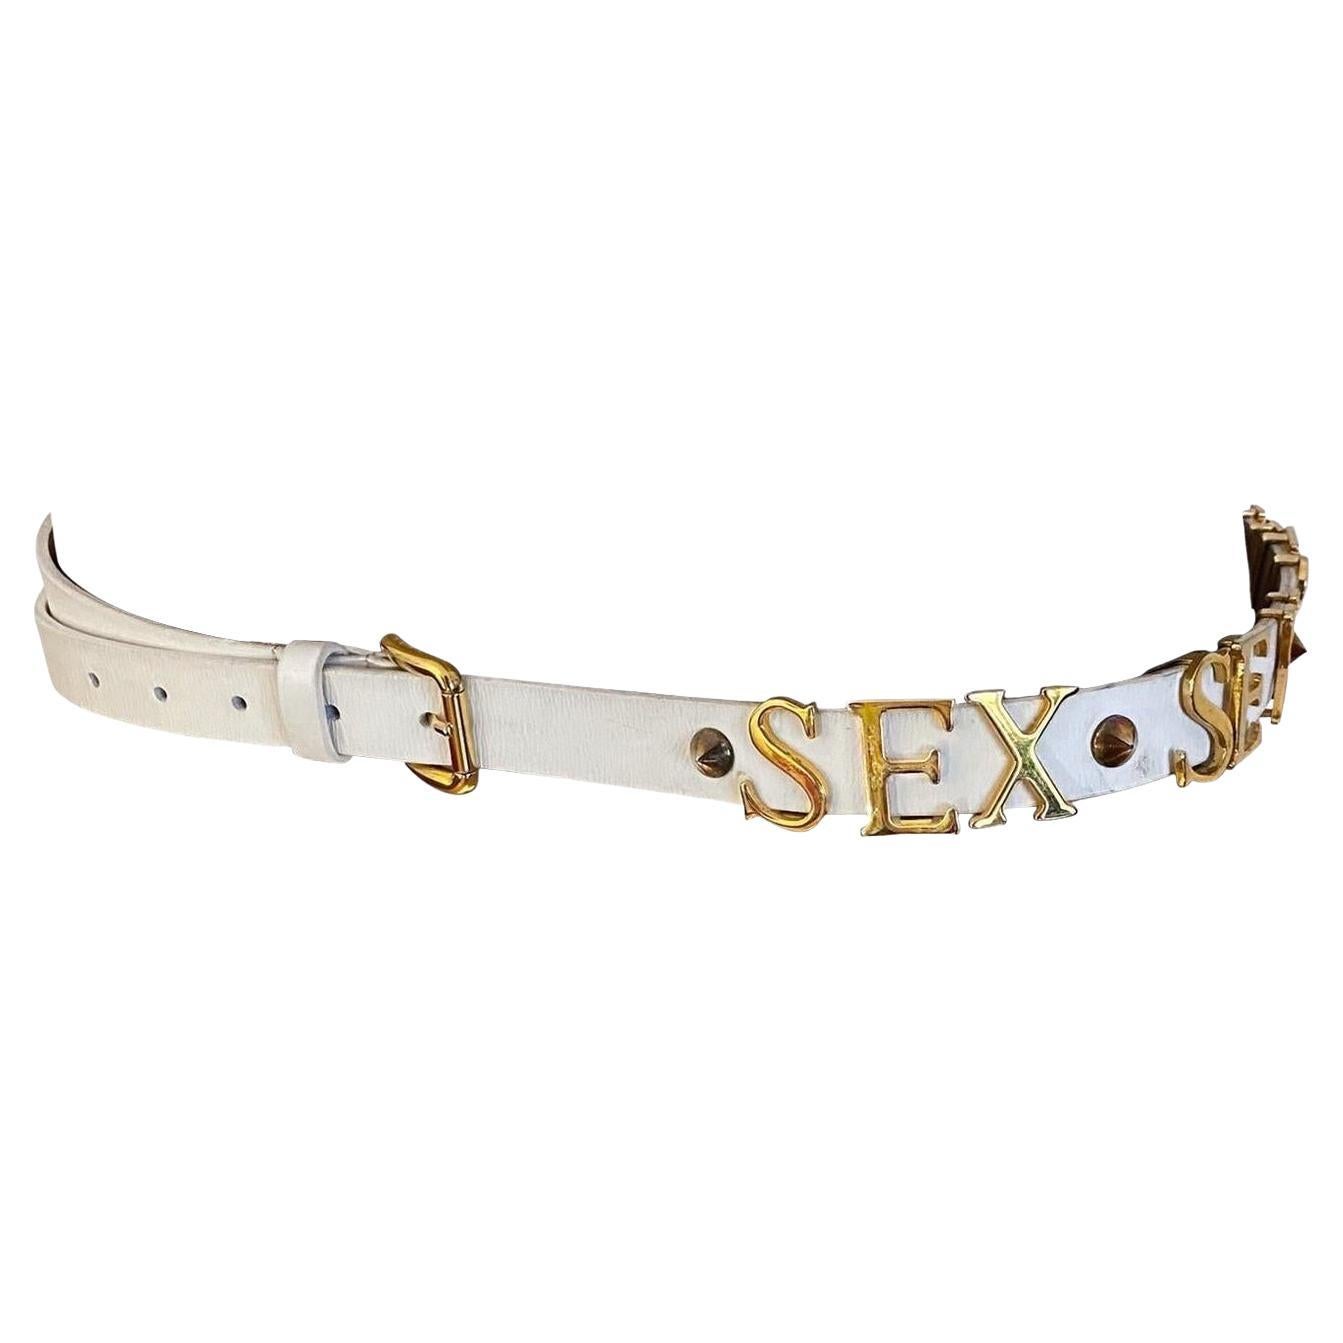 Dolce & Gabbana white leather belt with triple spell-out “Sex” Golden Metal Logo, gold studs and gold buckle from the Spring/Summer 2003 collection. 
Minor signs of usage.

Comes with original dust bag

Total length: 109.5 cm/ 43.1 inch
